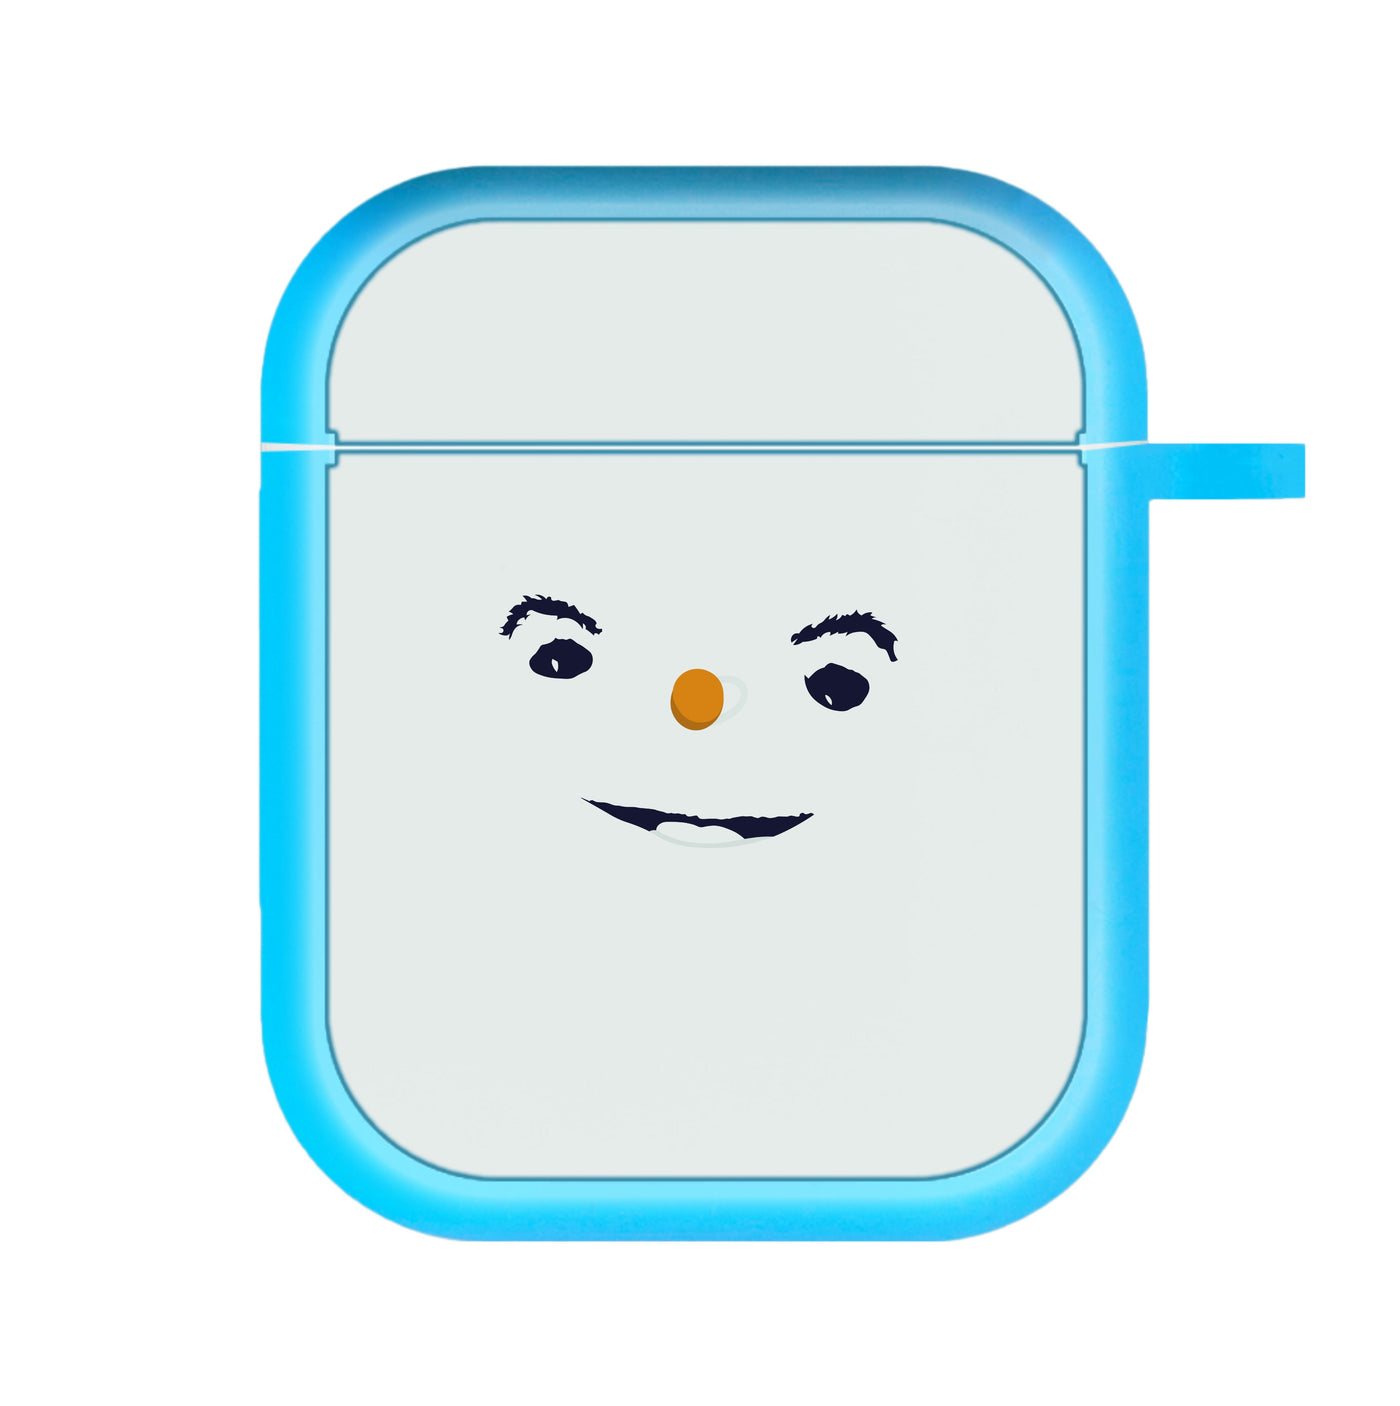 Snowman - Jack Frost AirPods Case